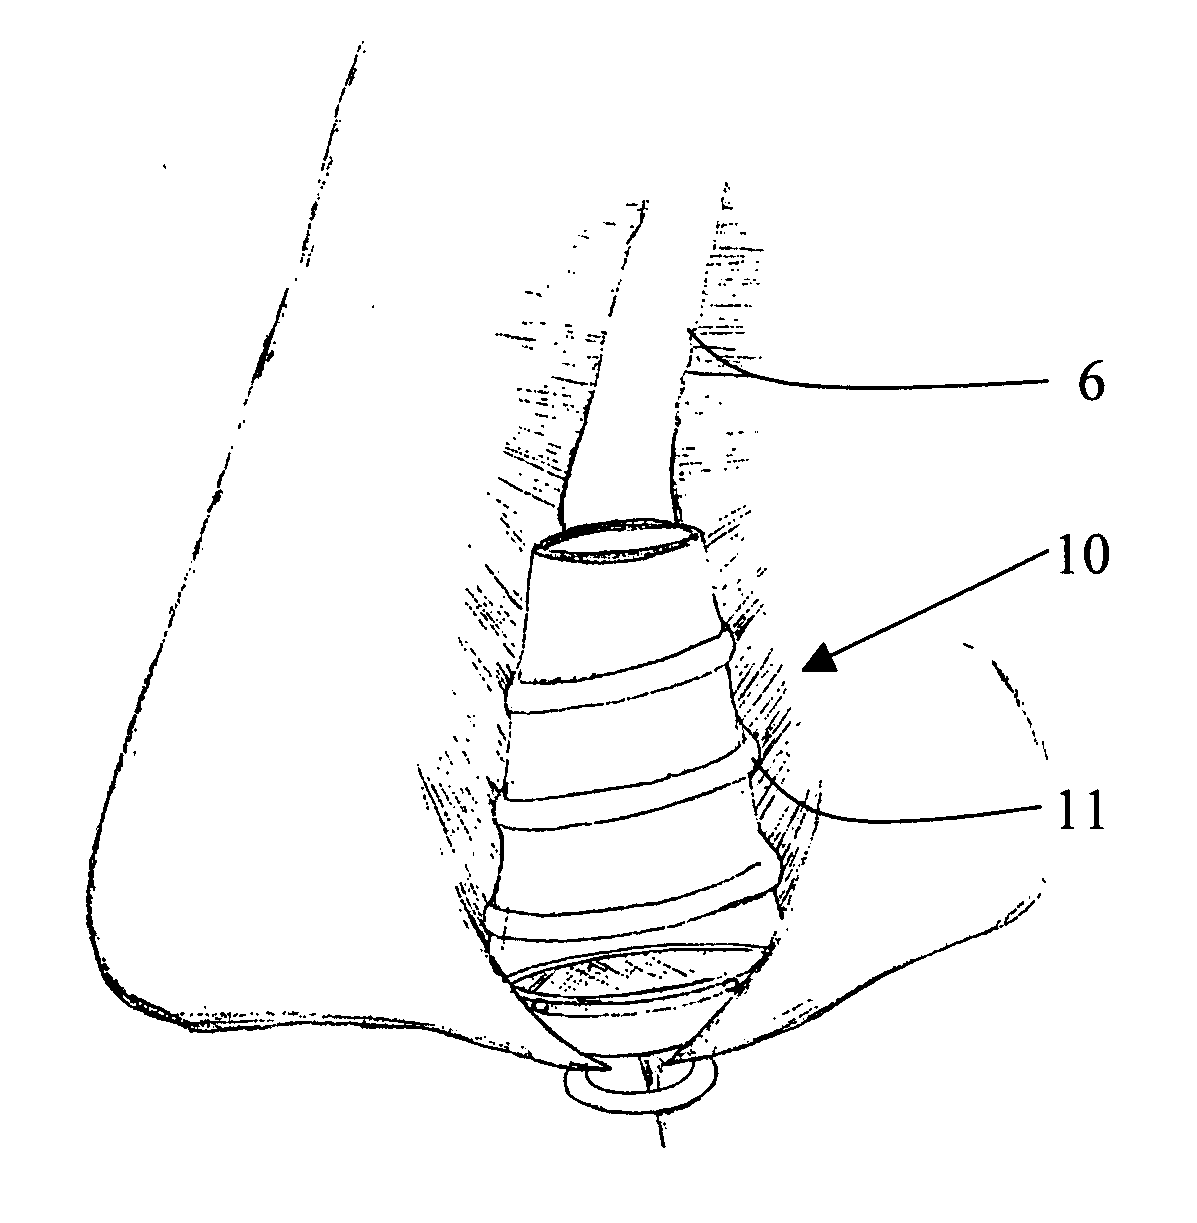 Nose device